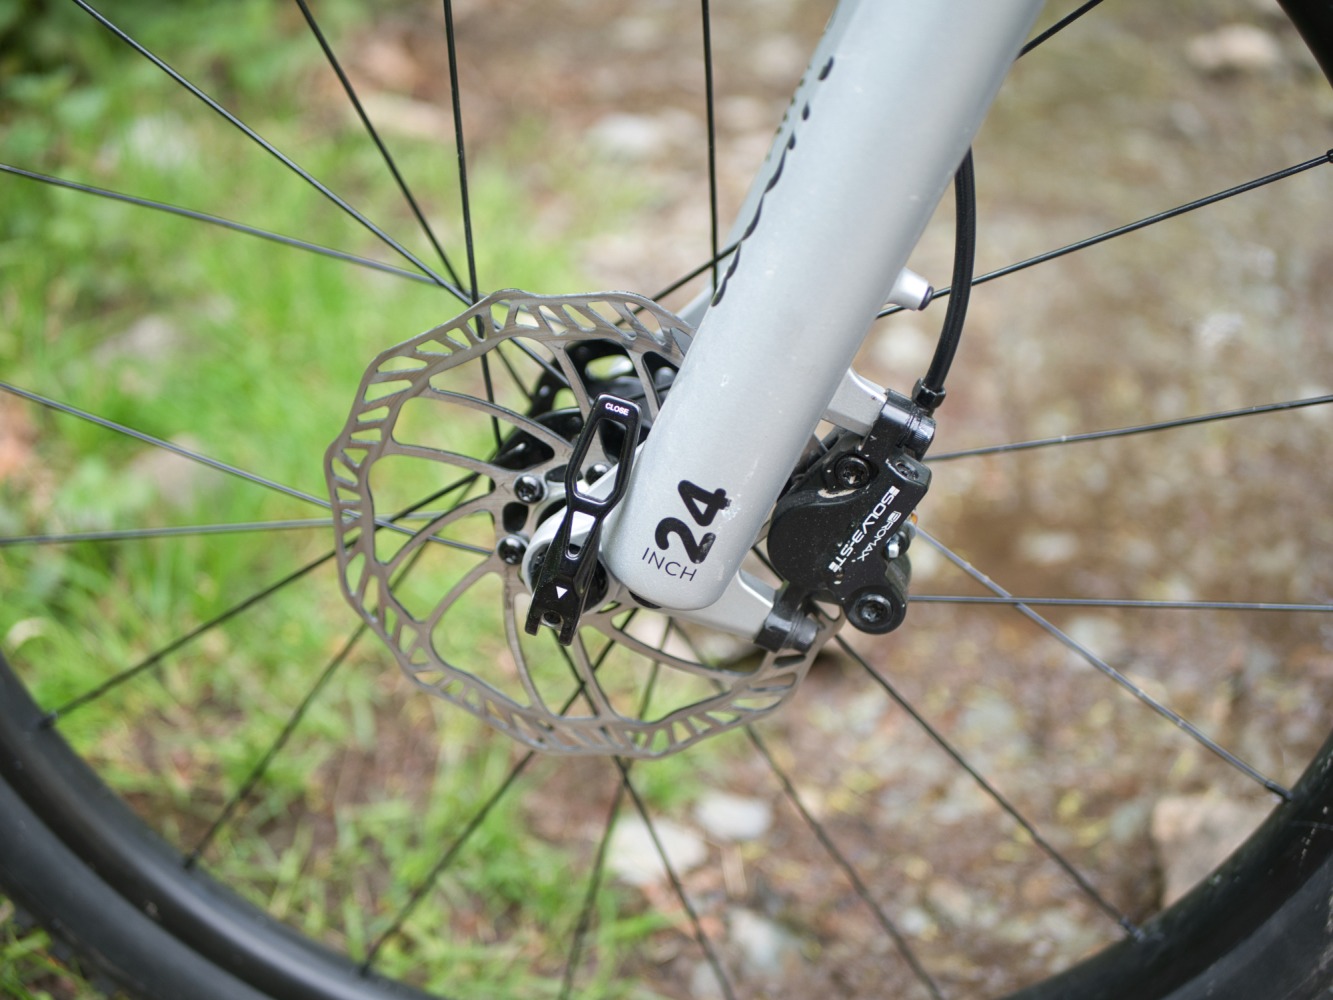 woom OFF AIR 5 review: close up of the front disc brake calliper and rotor